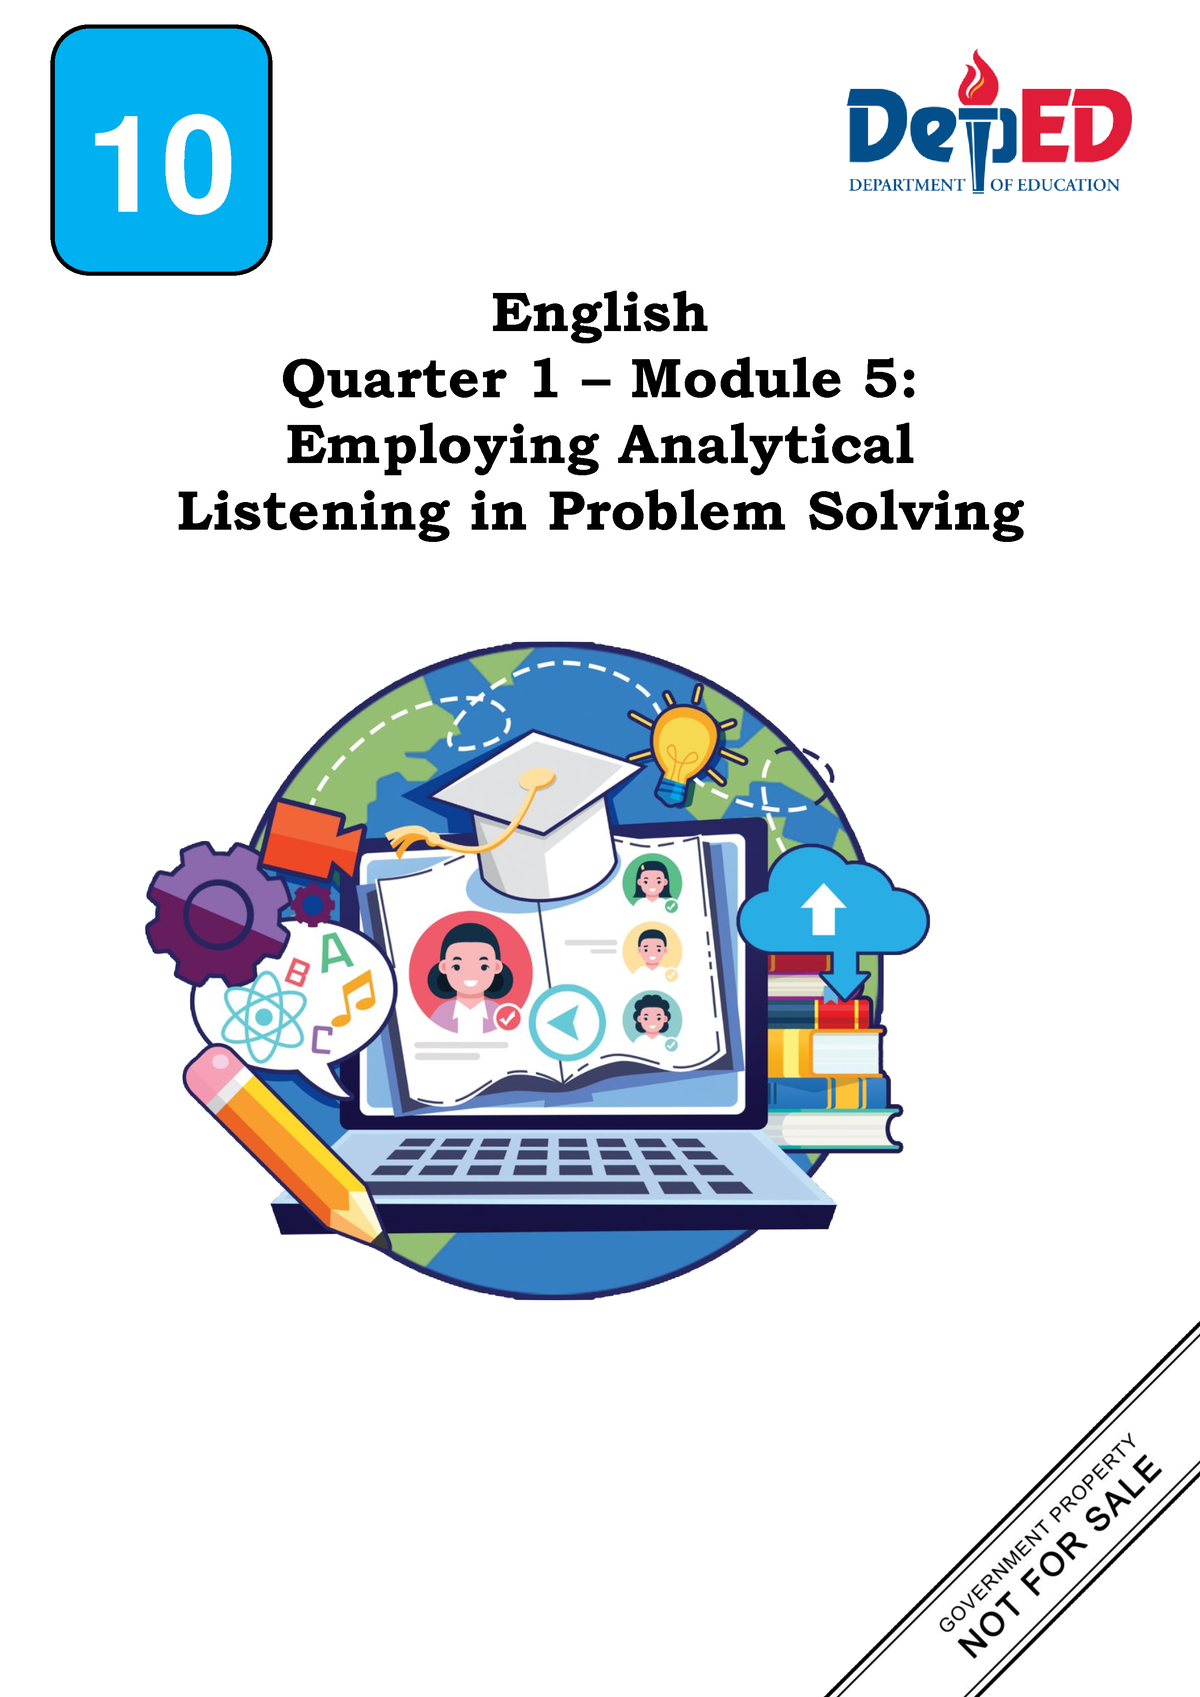 employ analytical listening in problem solving worksheets